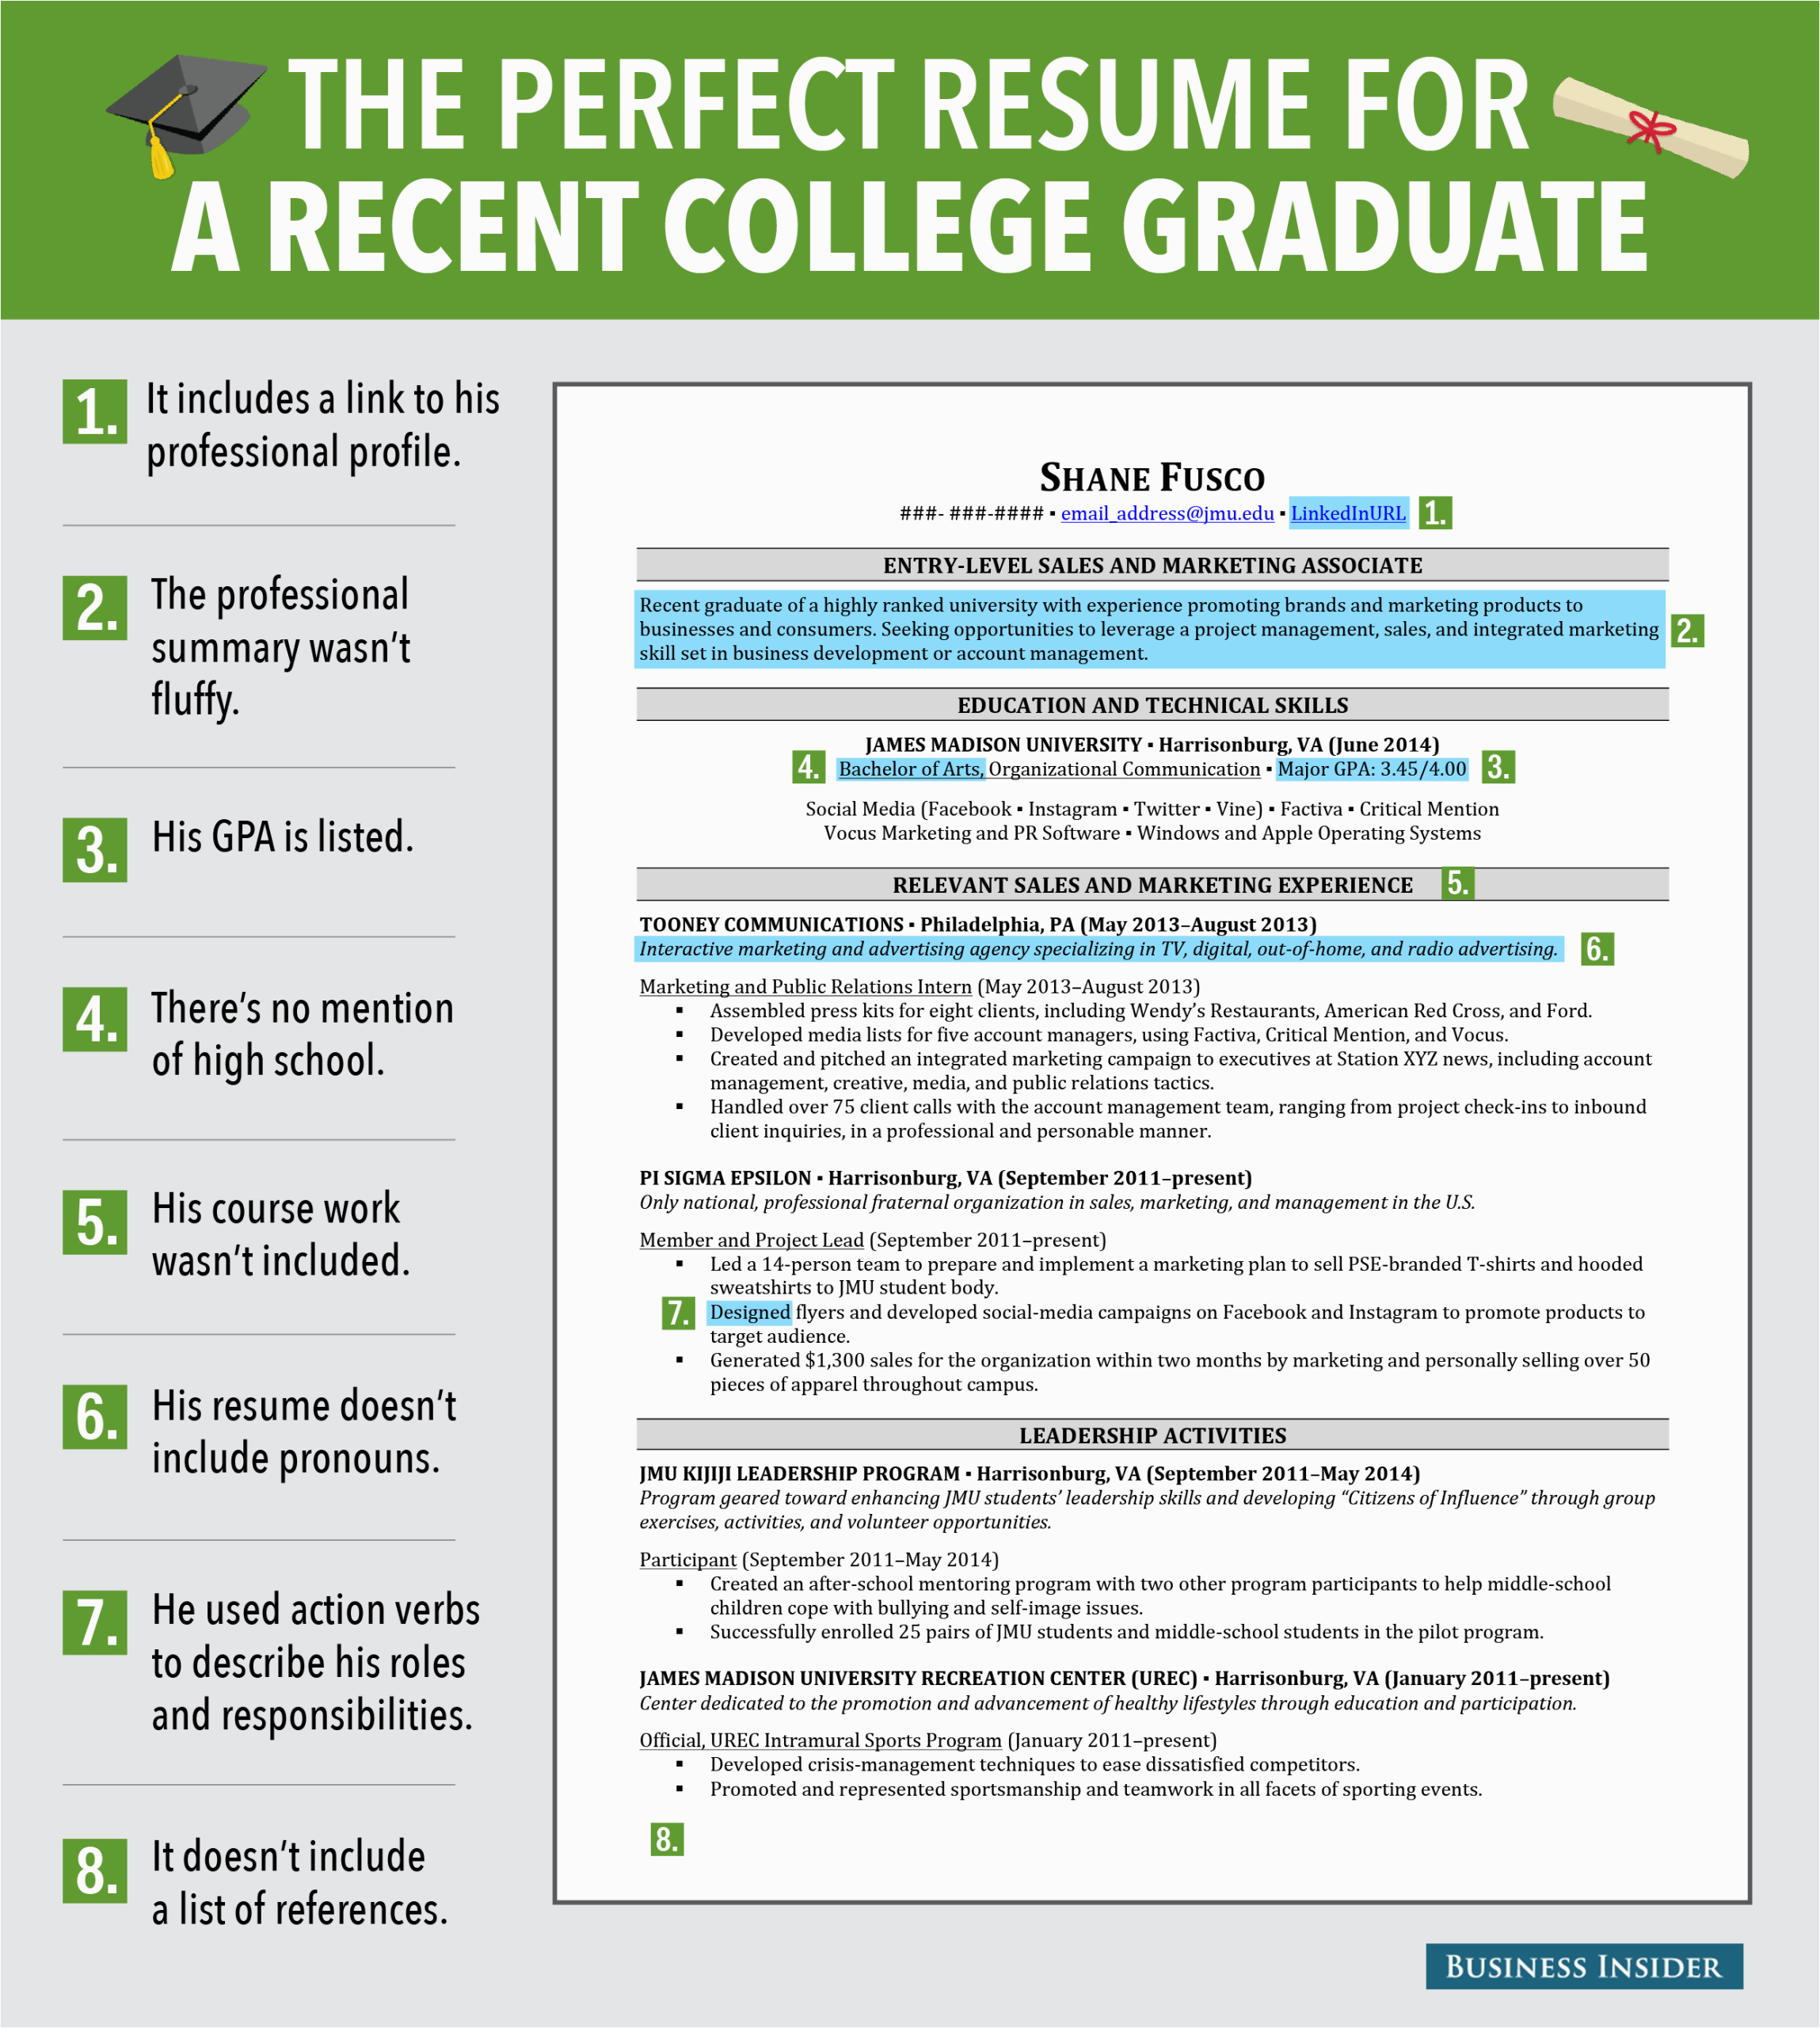 Effective Resume Sample for Fresh Graduates 8 Reasons This is An Excellent Resume for A Recent College Graduate